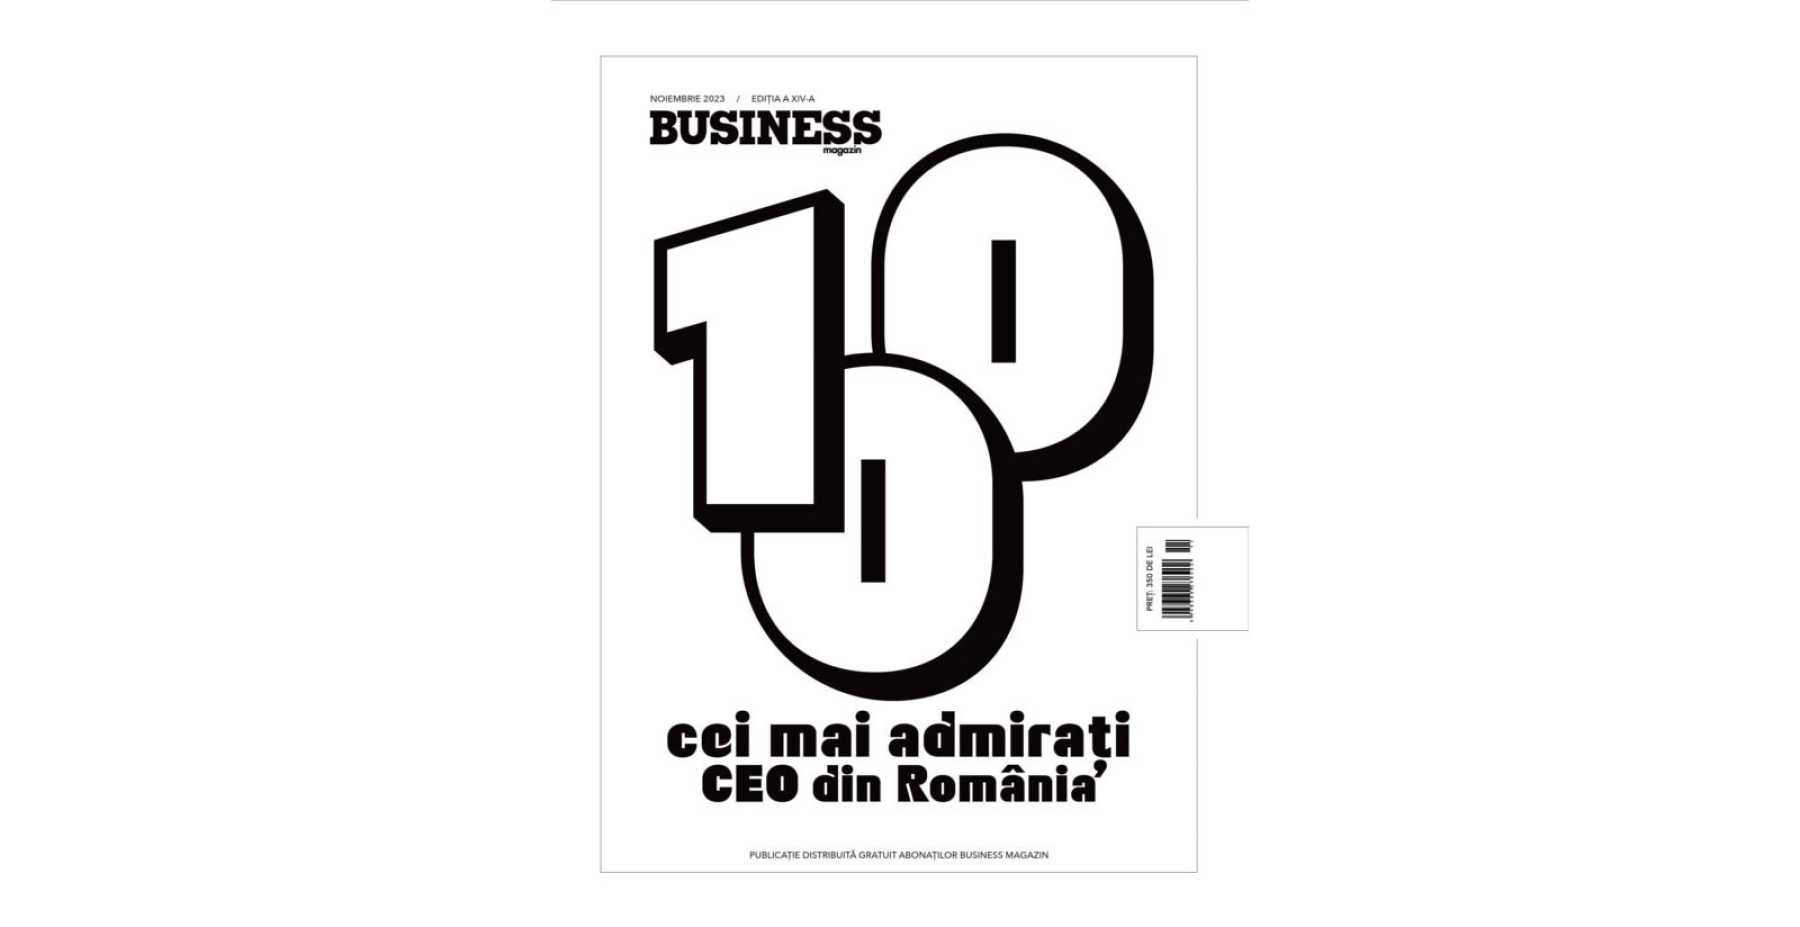 Victor Căpitanu, co-founder and co-CEO of One United Properties, attains a place on Business Magazin 100 most admired CEOs list